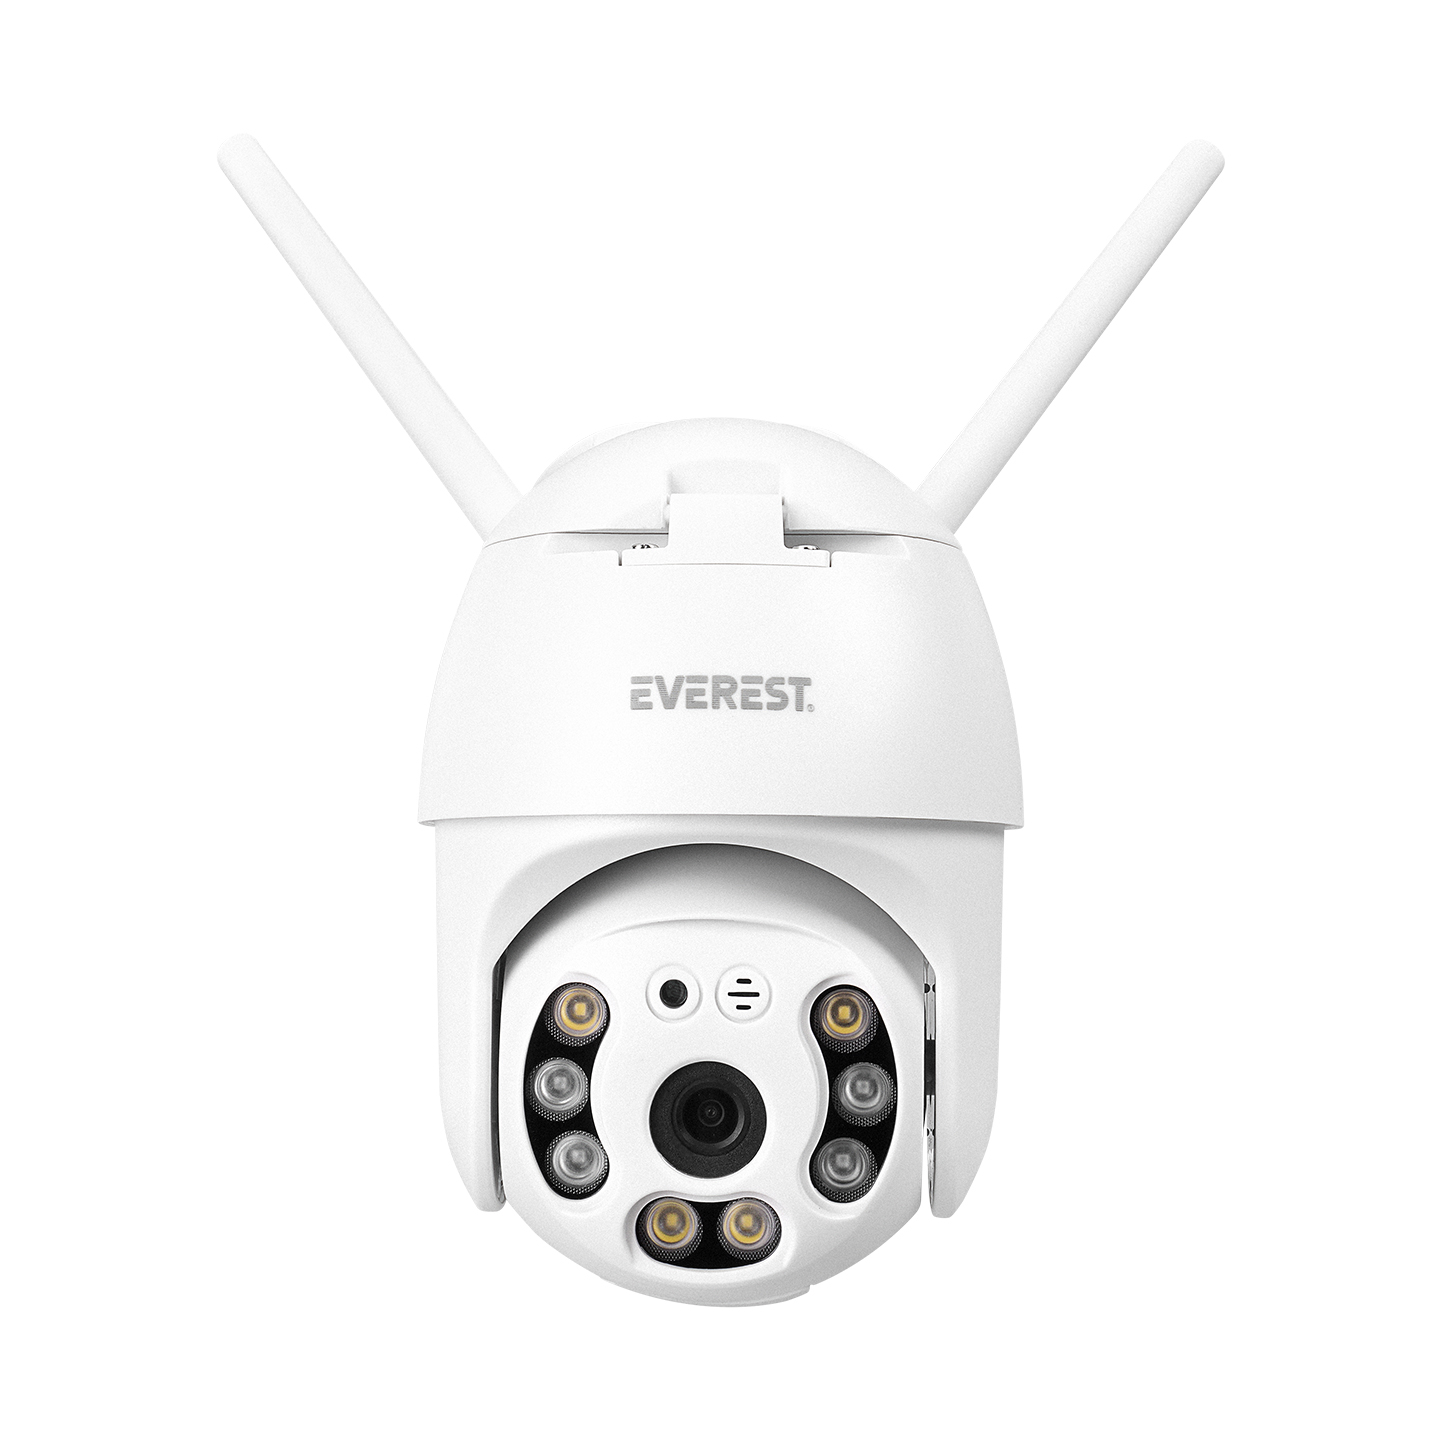 Everest DF-804W 2.0 MP HD Lens 3.6mm IP Smart Wifi Network TF Card Security Camera  Powered By Yoosee Mobile App.